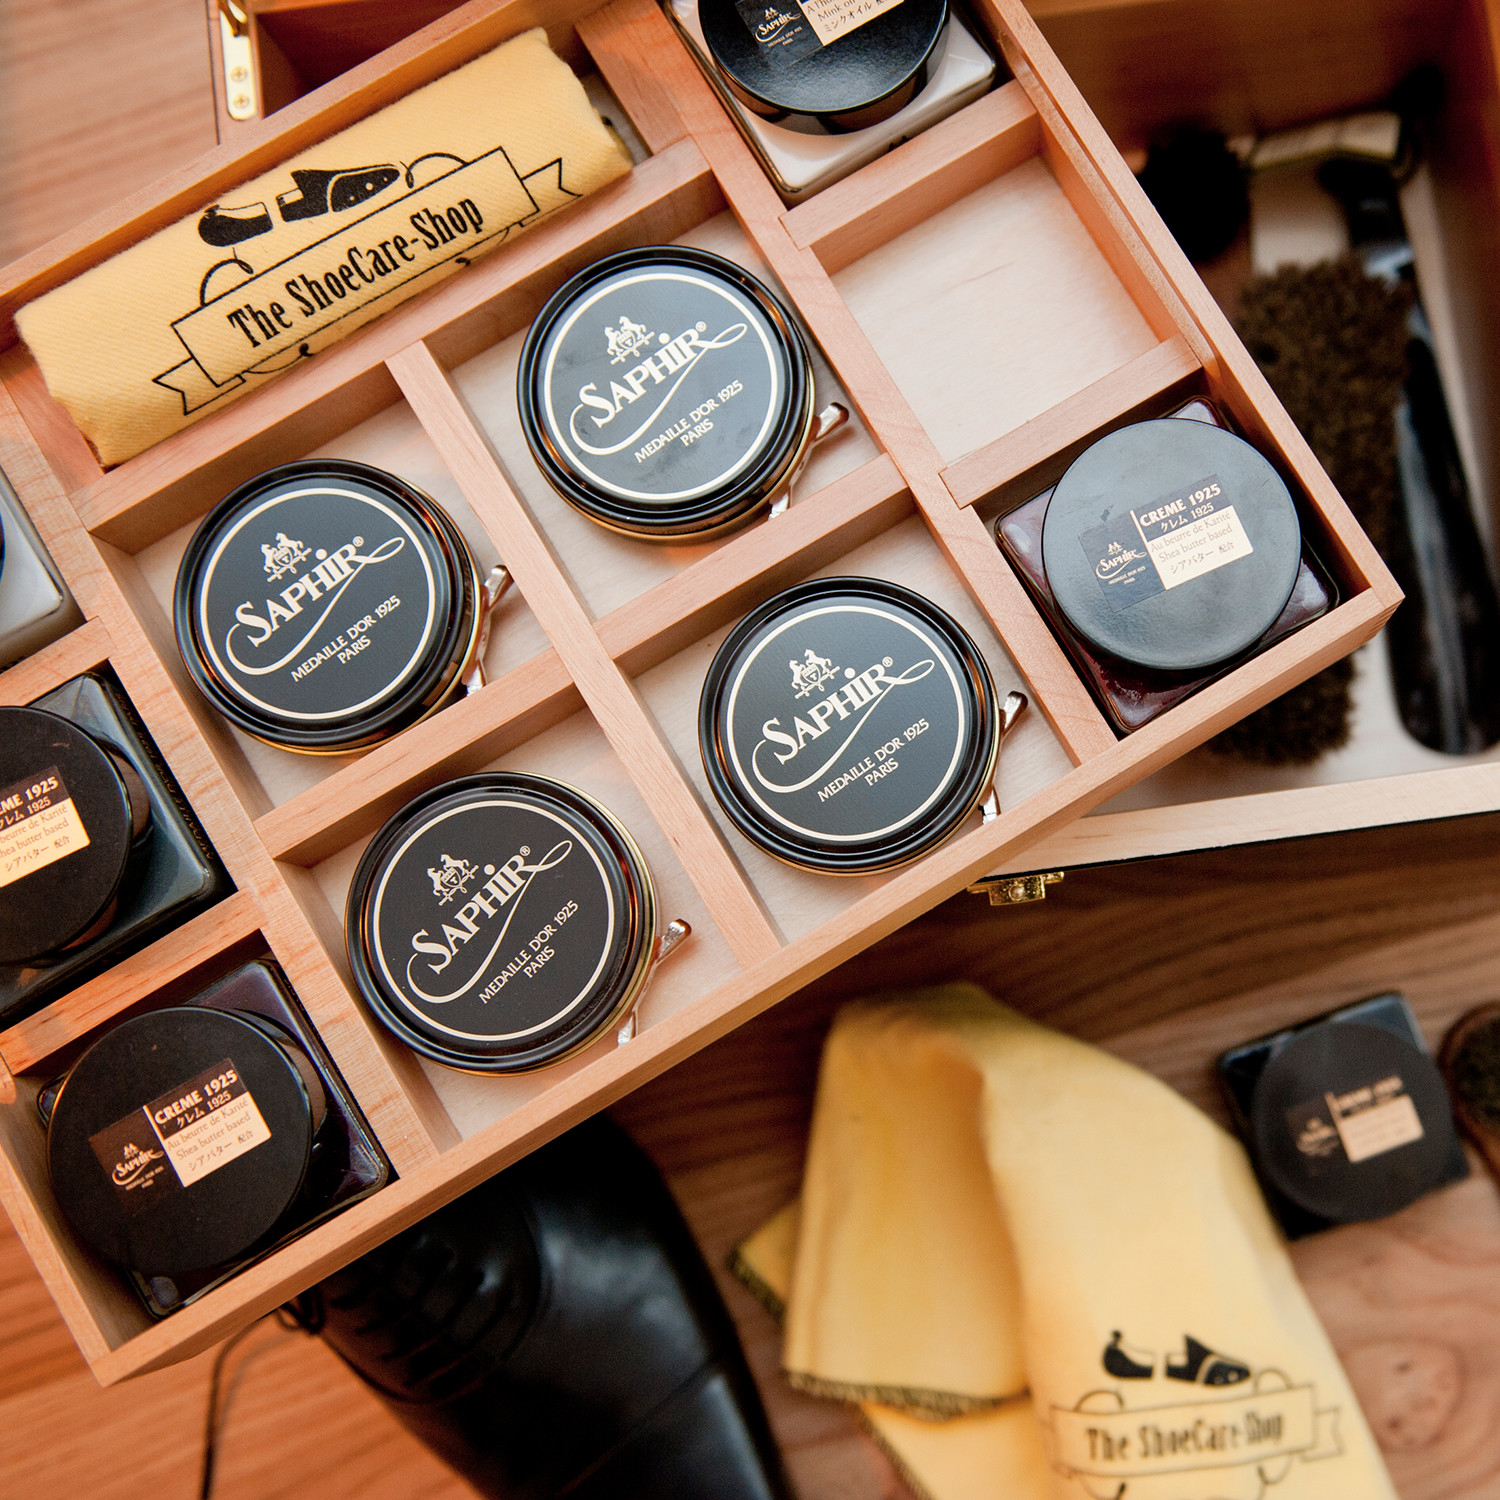 saphir shoe care products